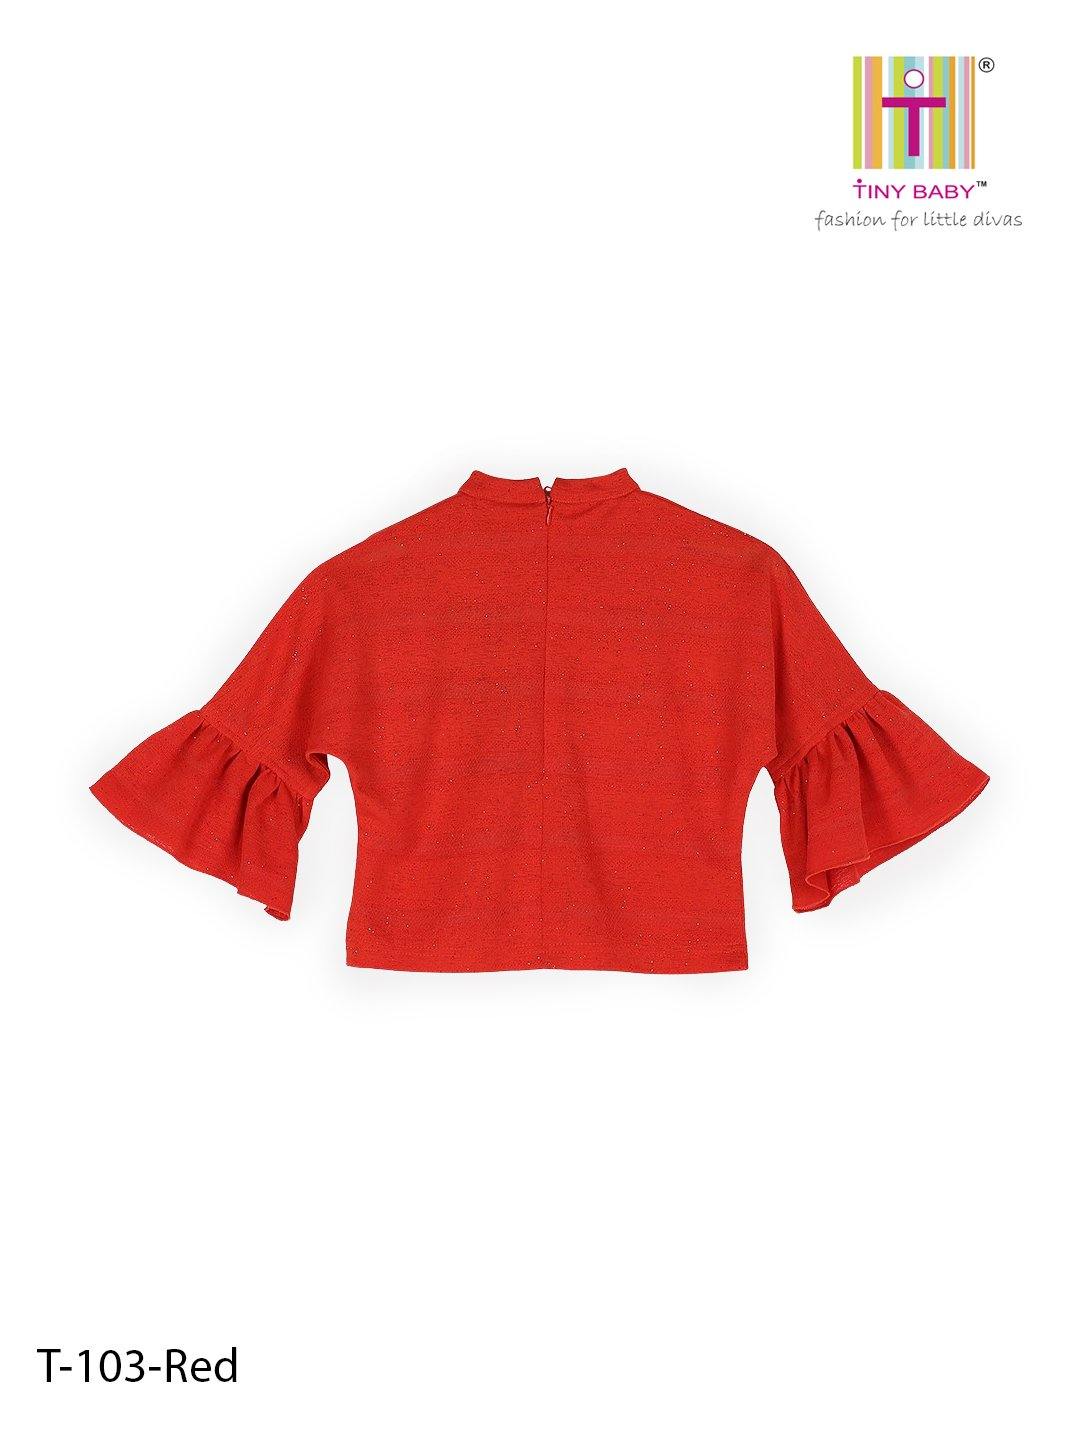 Tiny Baby Red Colored Top T-103-Red - TINY BABY INDIA shop.tinybaby.in